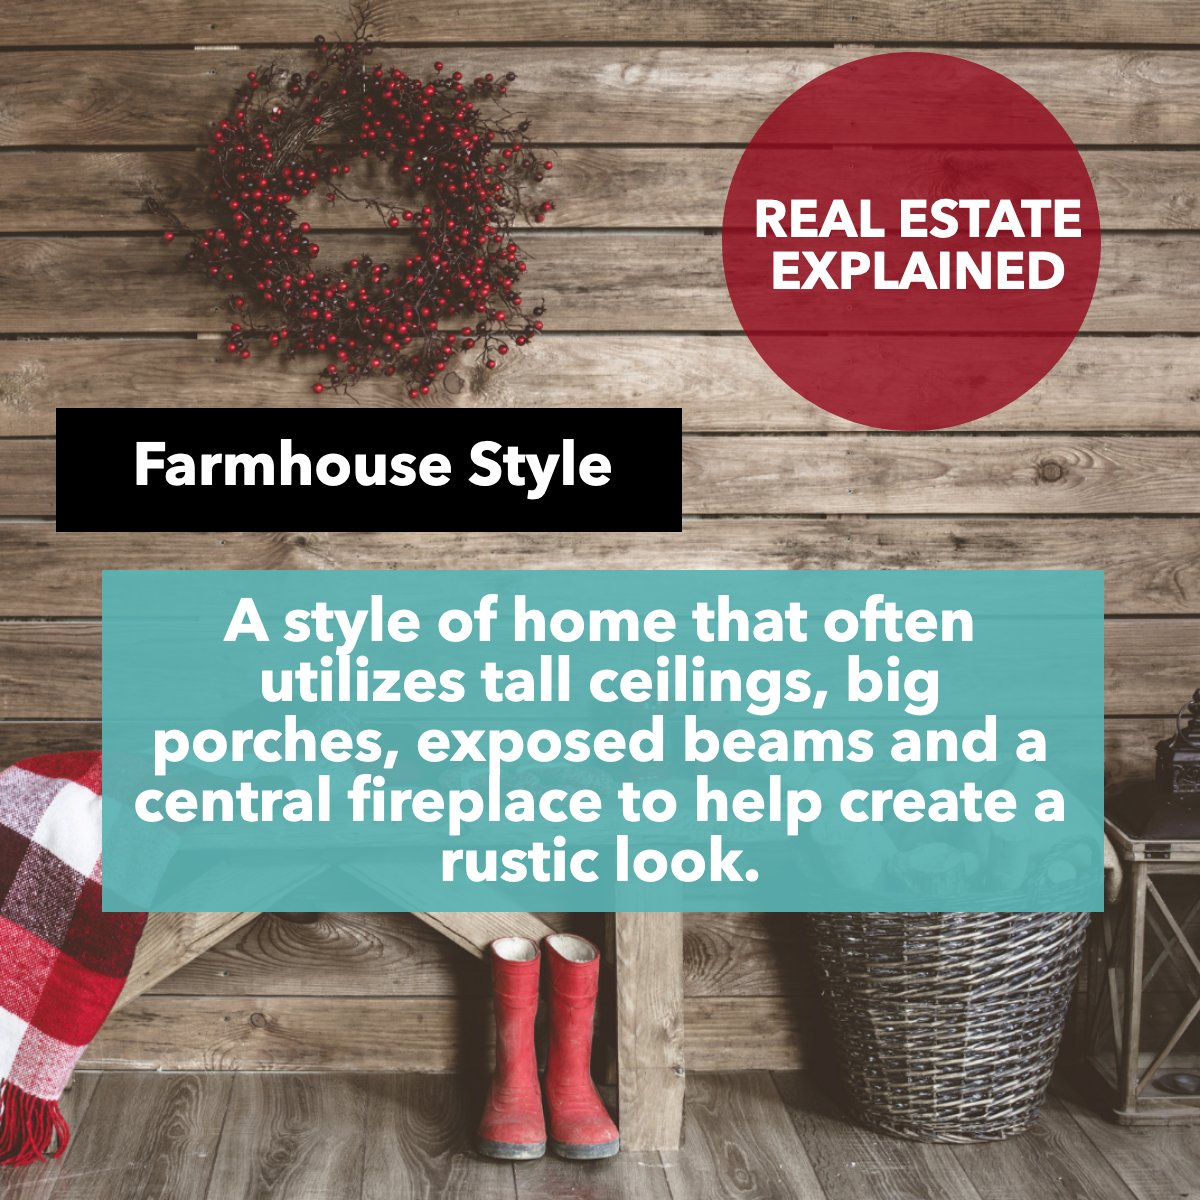 Did you know 🤔 what a Farmhouse Style is 🏡

Is this the type of house that you like

#farmhousestylehome #farmhousestyledesign #farmhousestyleinspired #farmhouseismystyle
#knowthegame #IXLREALESTATE #SouthAlabamaHomeSearch